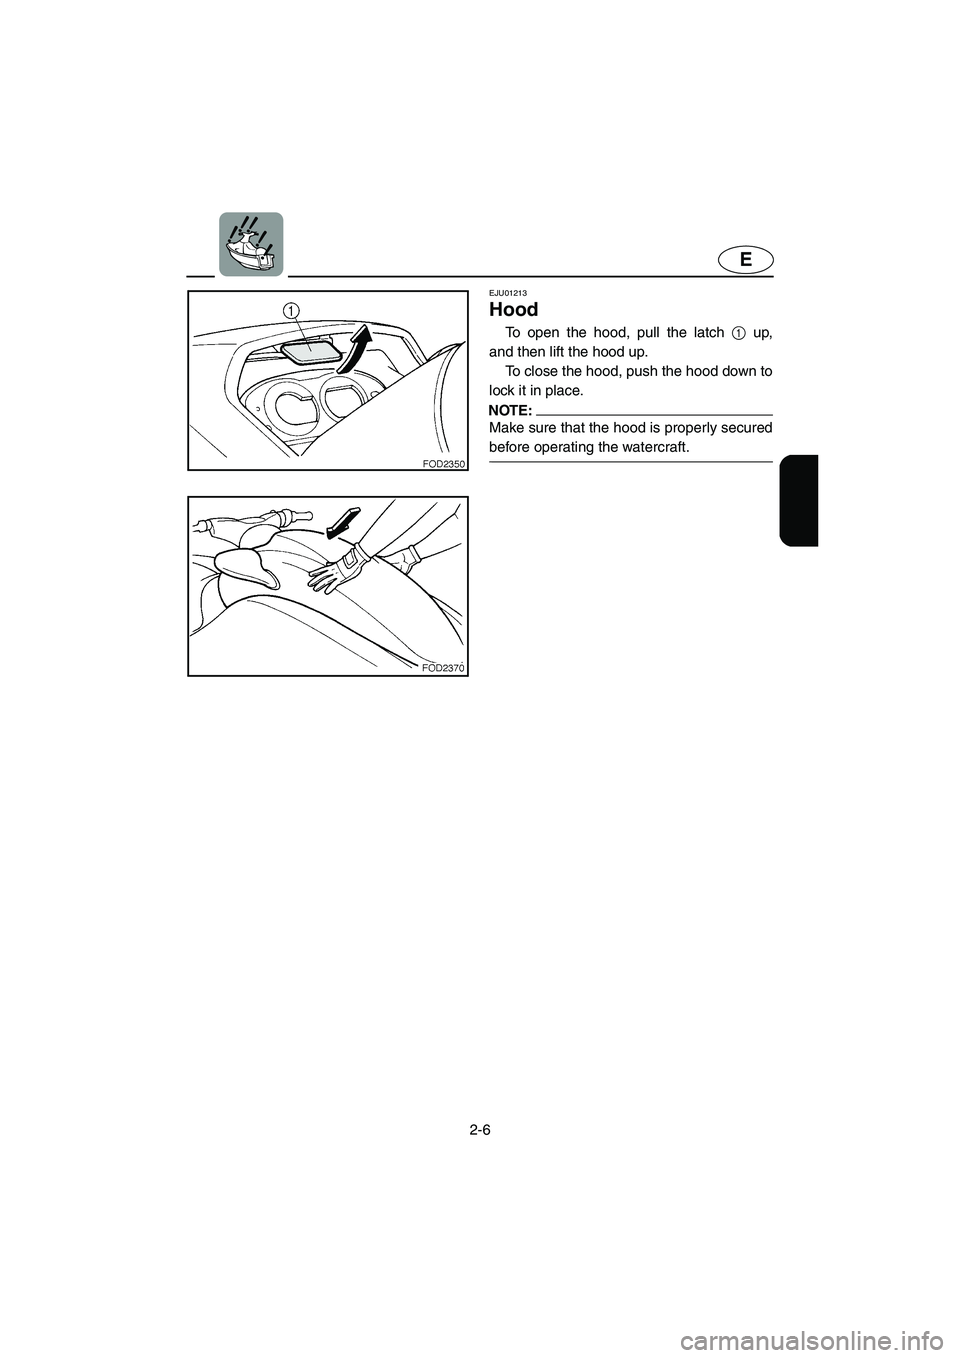 YAMAHA SUV 1200 2003 Owners Guide 2-6
E
EJU01213 
Hood  
To open the hood, pull the latch 1 up,
and then lift the hood up. 
To close the hood, push the hood down to
lock it in place. 
NOTE:@ Make sure that the hood is properly secured